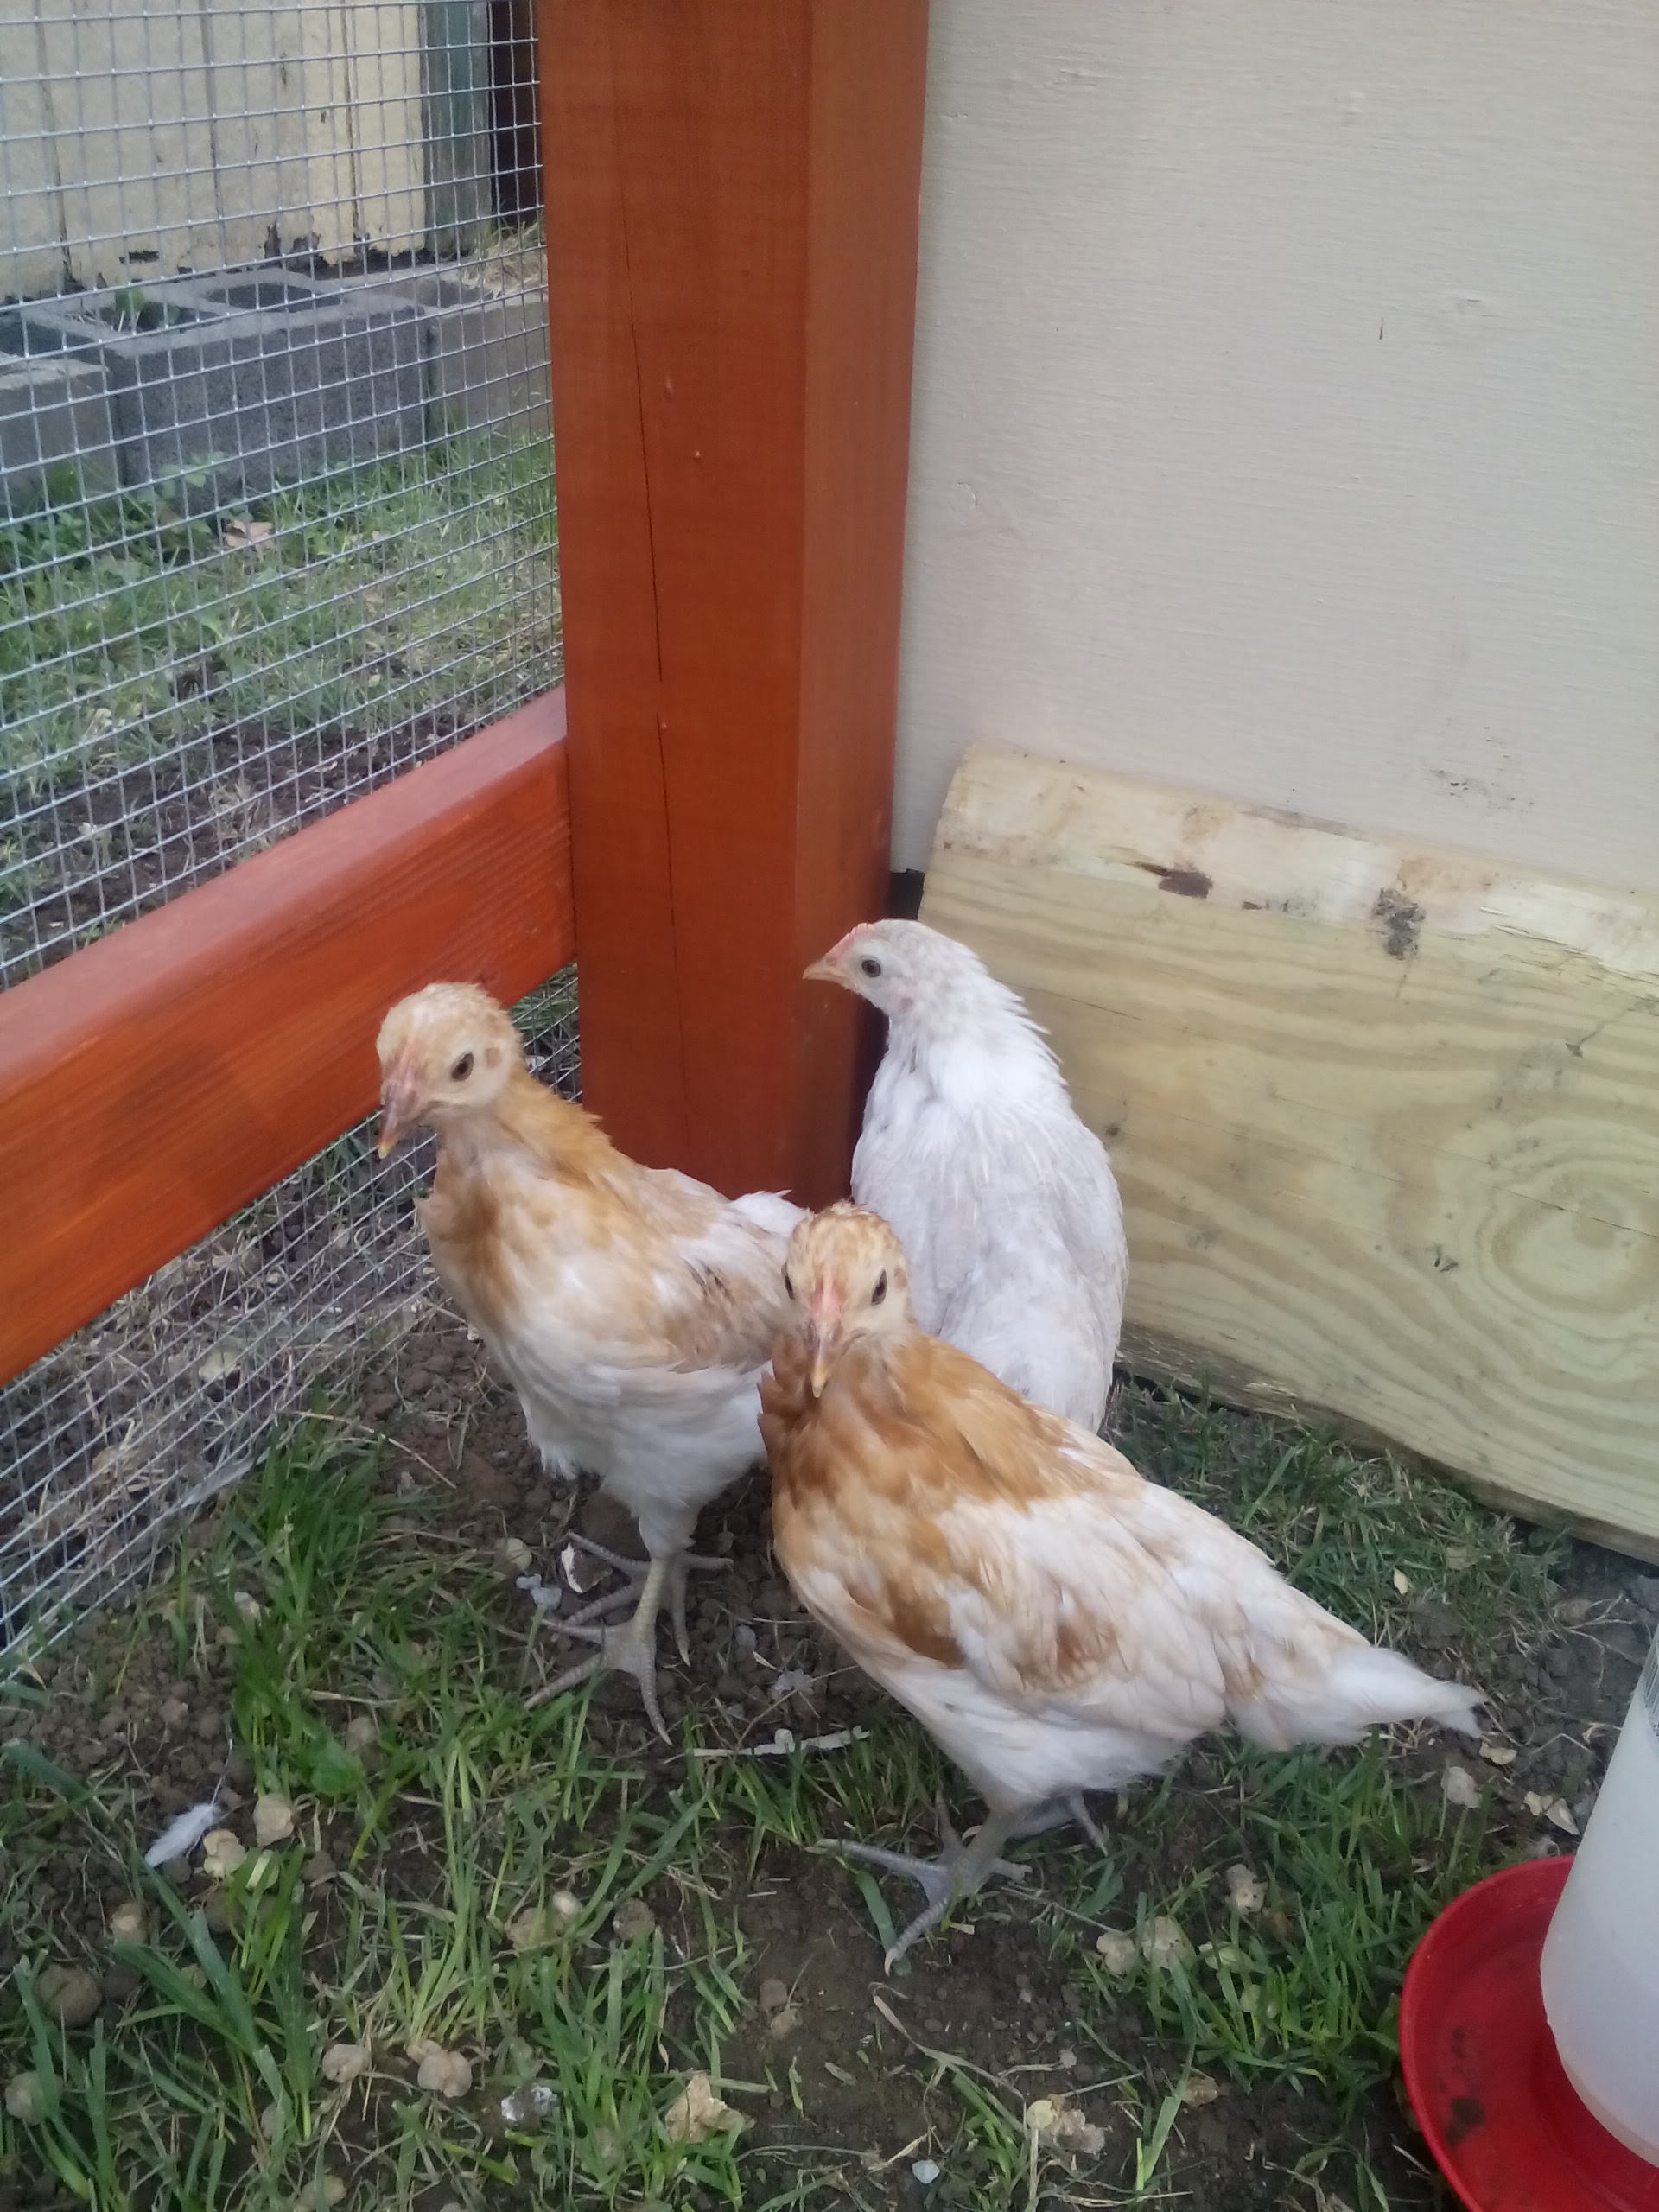 Our three older chicks. They are about 5 weeks old in this pic. From left to right we have Butterscotch, Queenie and Snow. They are a mix of Phoenix and ISA Brown. There were 6 of them originally but we are unable to keep roosters. We get 6 chicks and half of them turn out to be roos. Go figure! And one of the roosters was our favorite chick!!